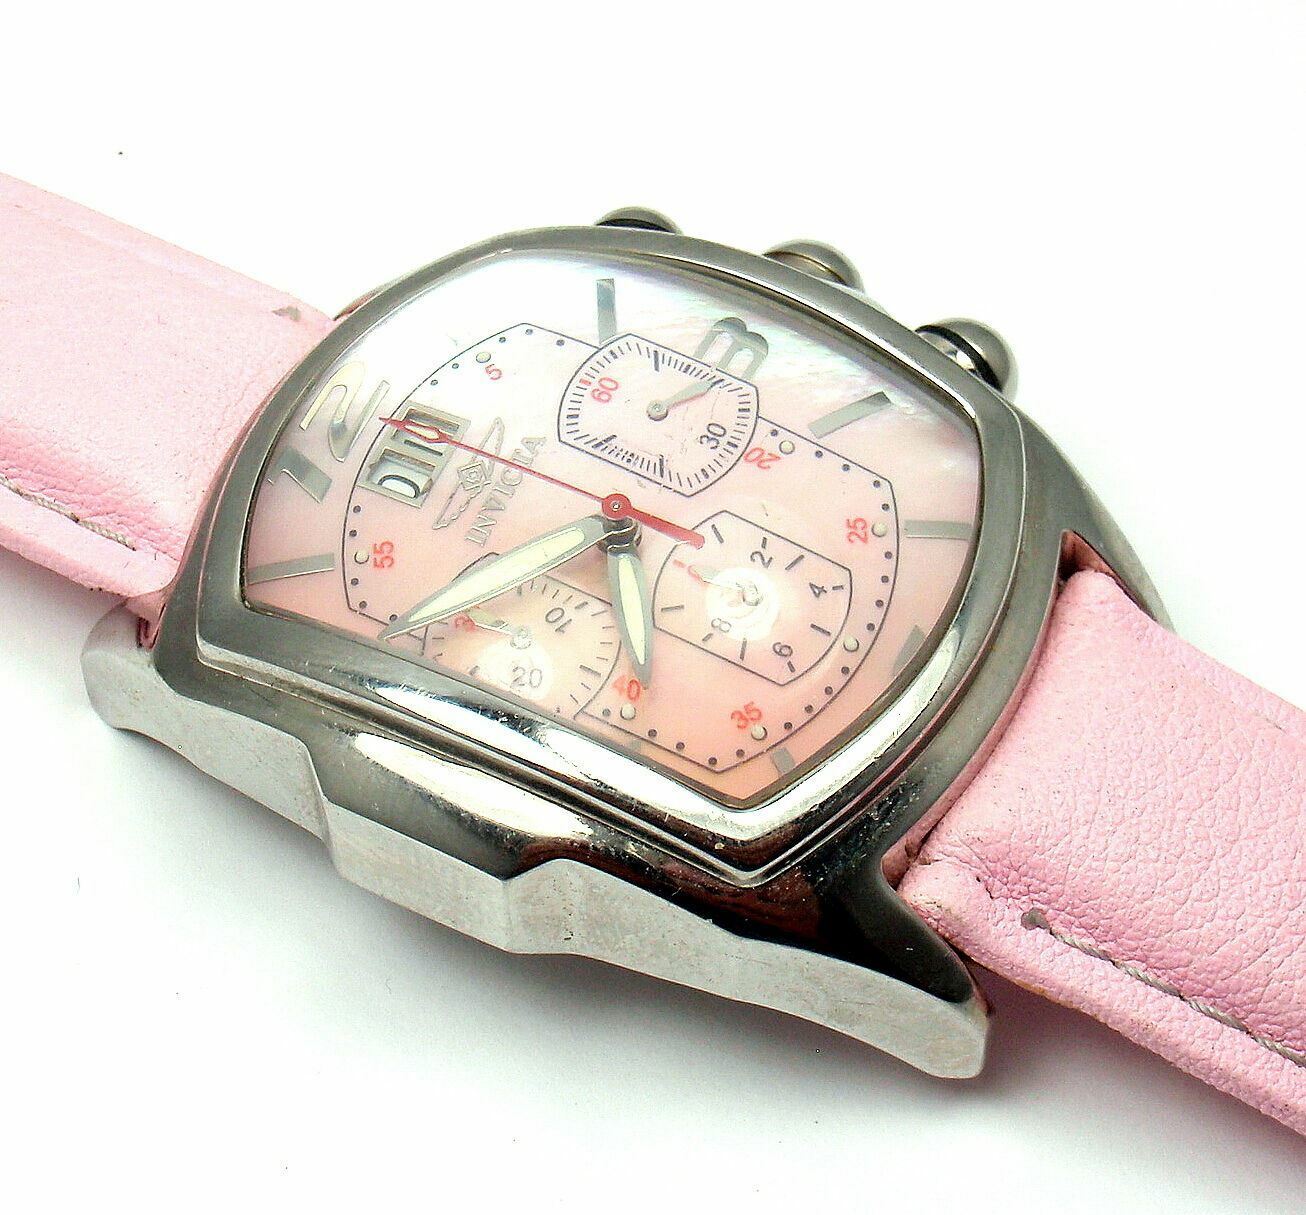 Invicta Jewelry & Watches:Watches, Parts & Accessories:Watches:Wristwatches Rare! Invicta Large Dragon Lupah Pink Mother of Pearl Quartz Mens Watch 2467